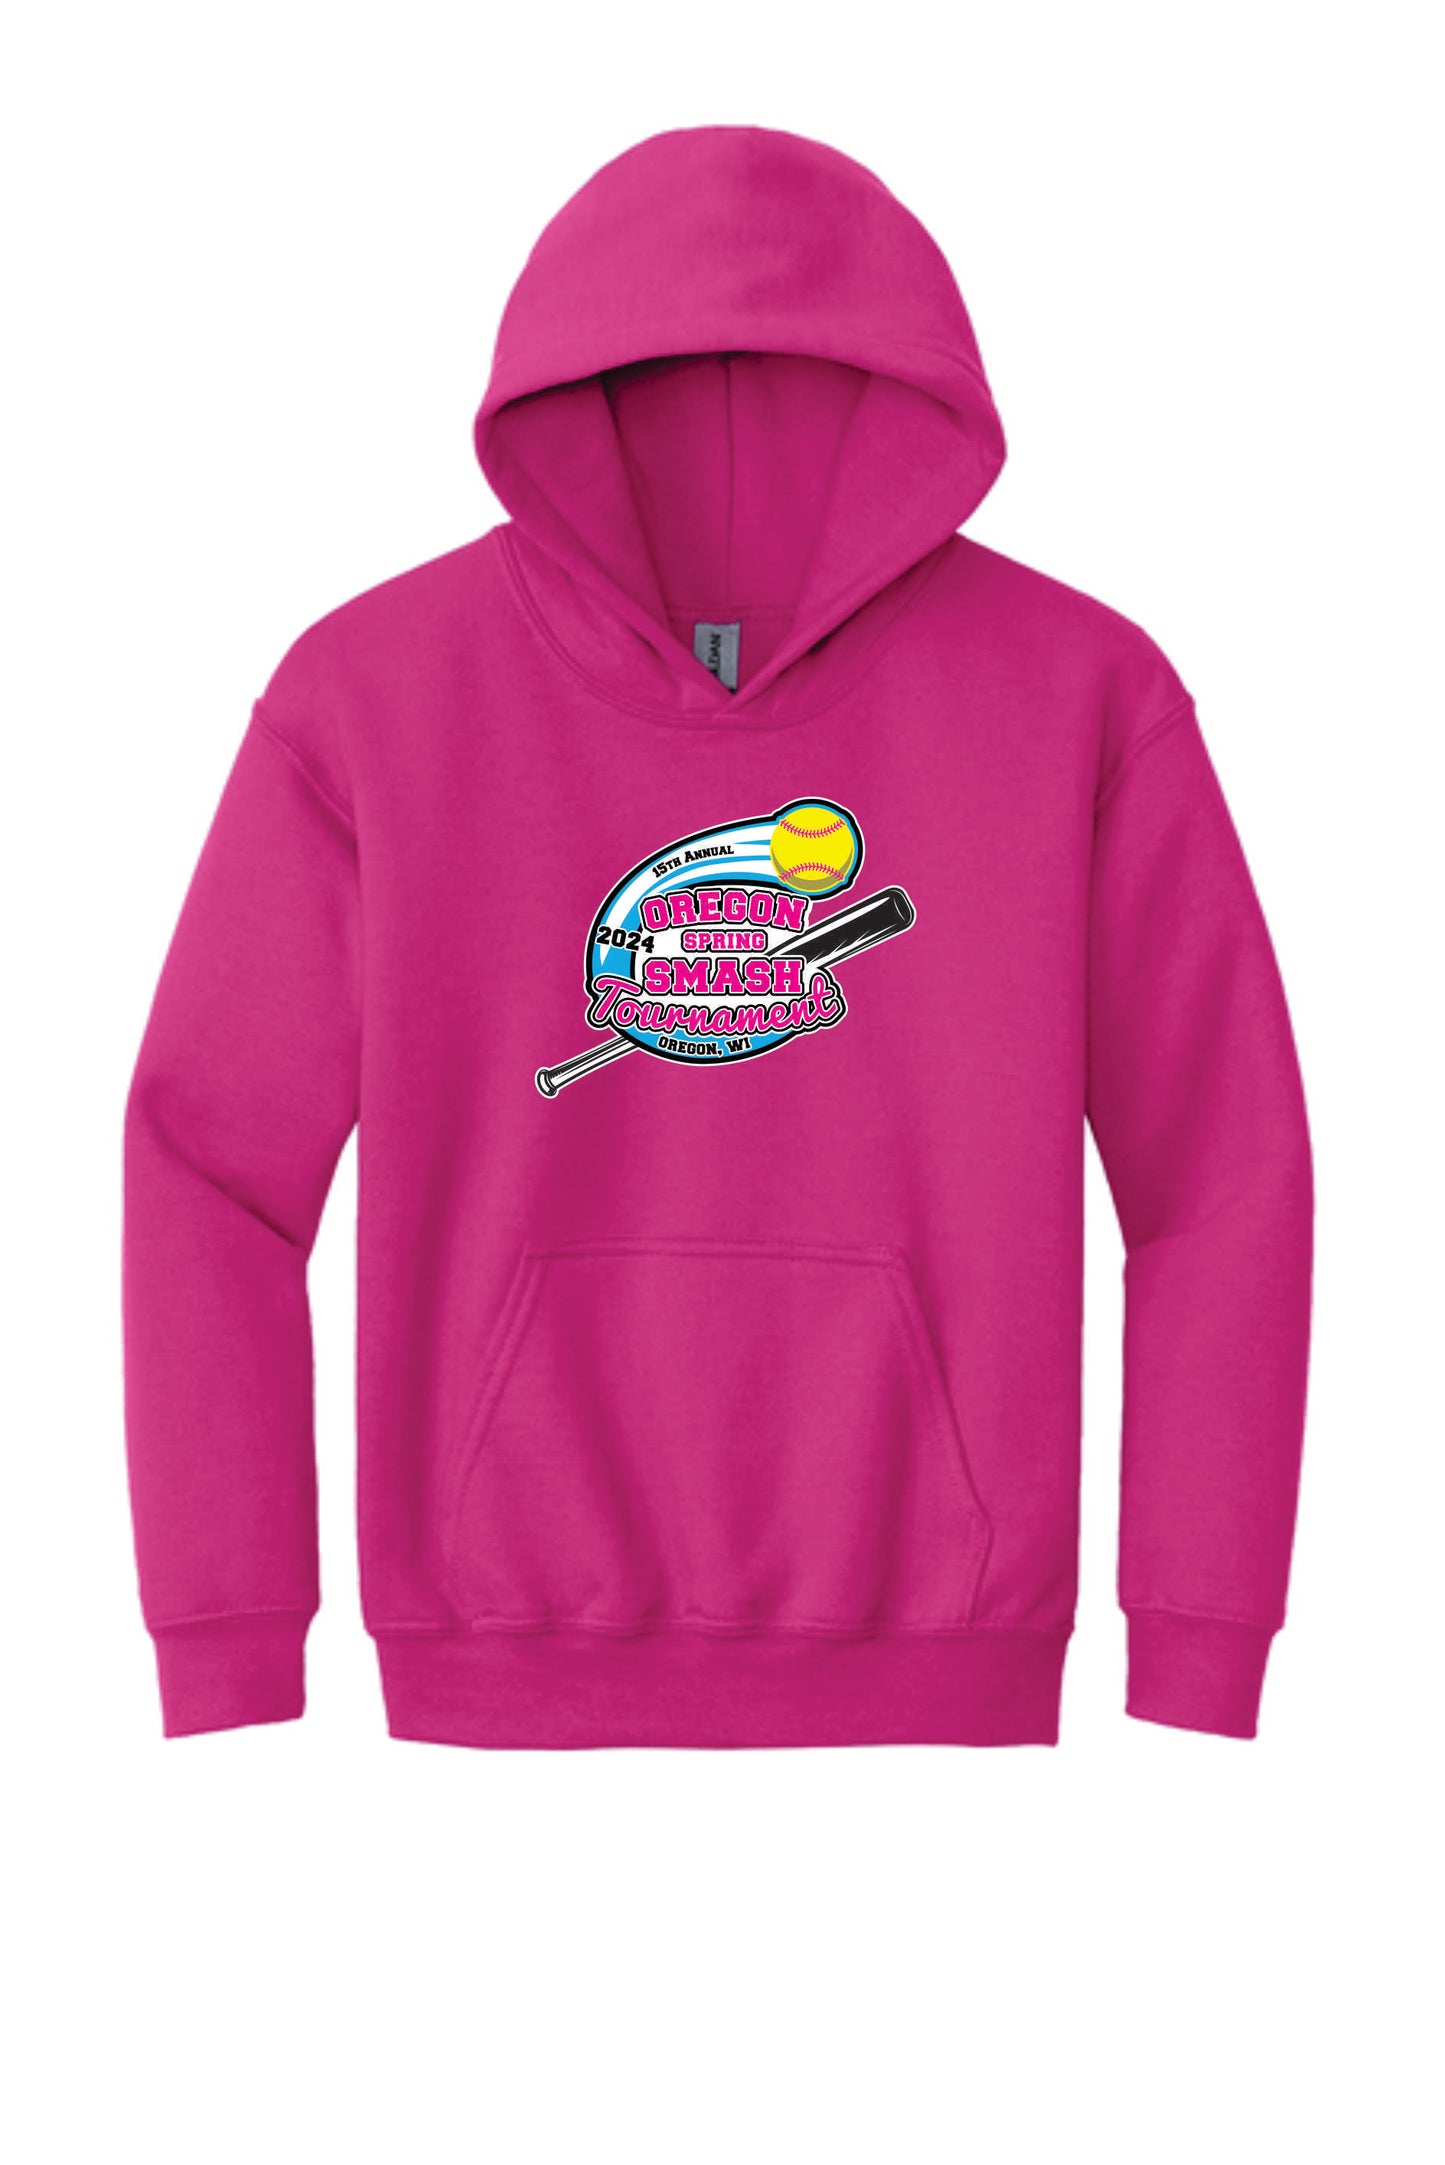 Oregon Softball Summer Smash Tournament Hoodie Unisex/ Youth Available for Pre order only! Azalea